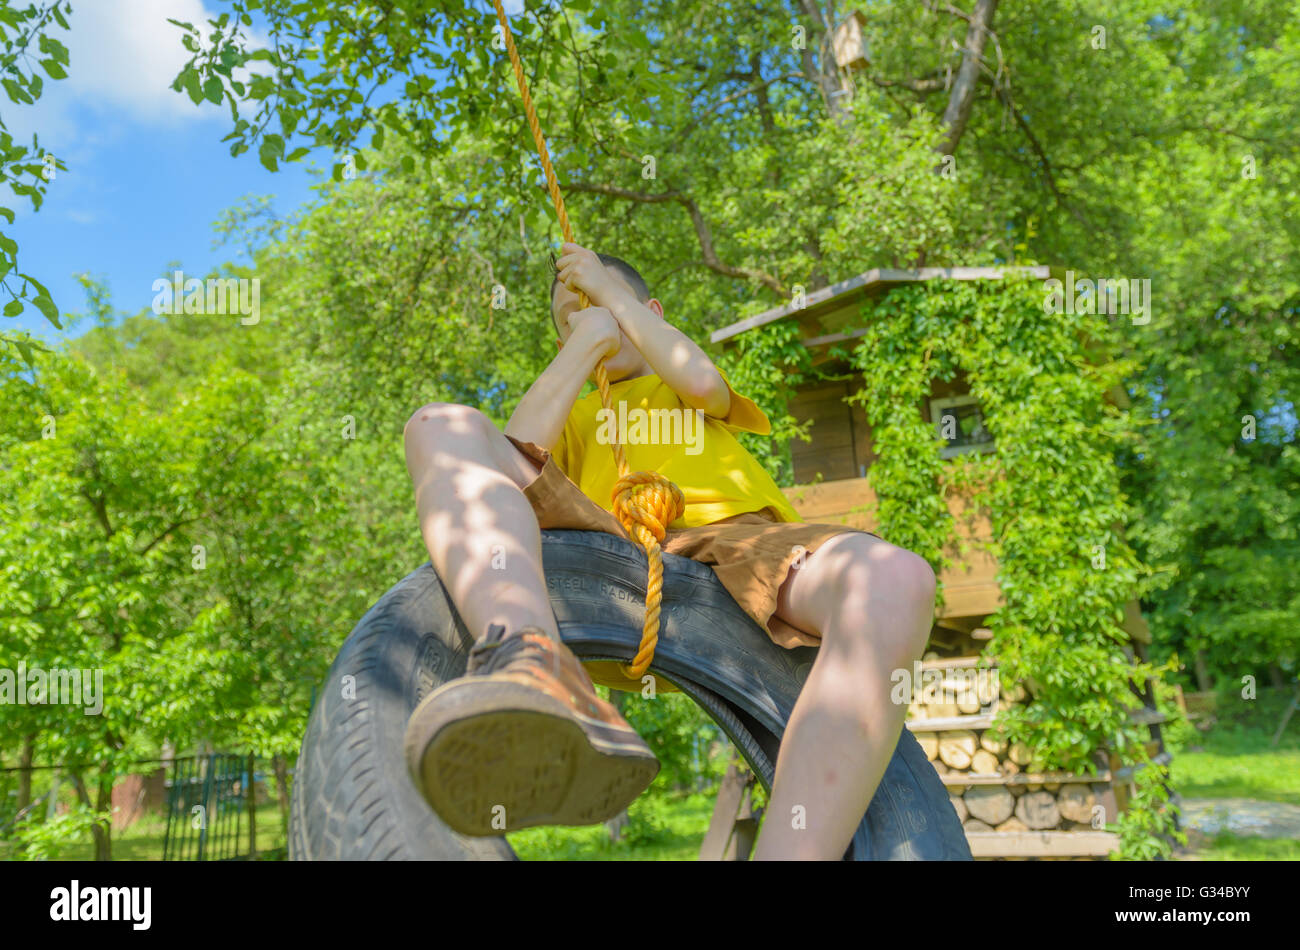 Smiling boy on treehouse. Summer time! Stock Photo